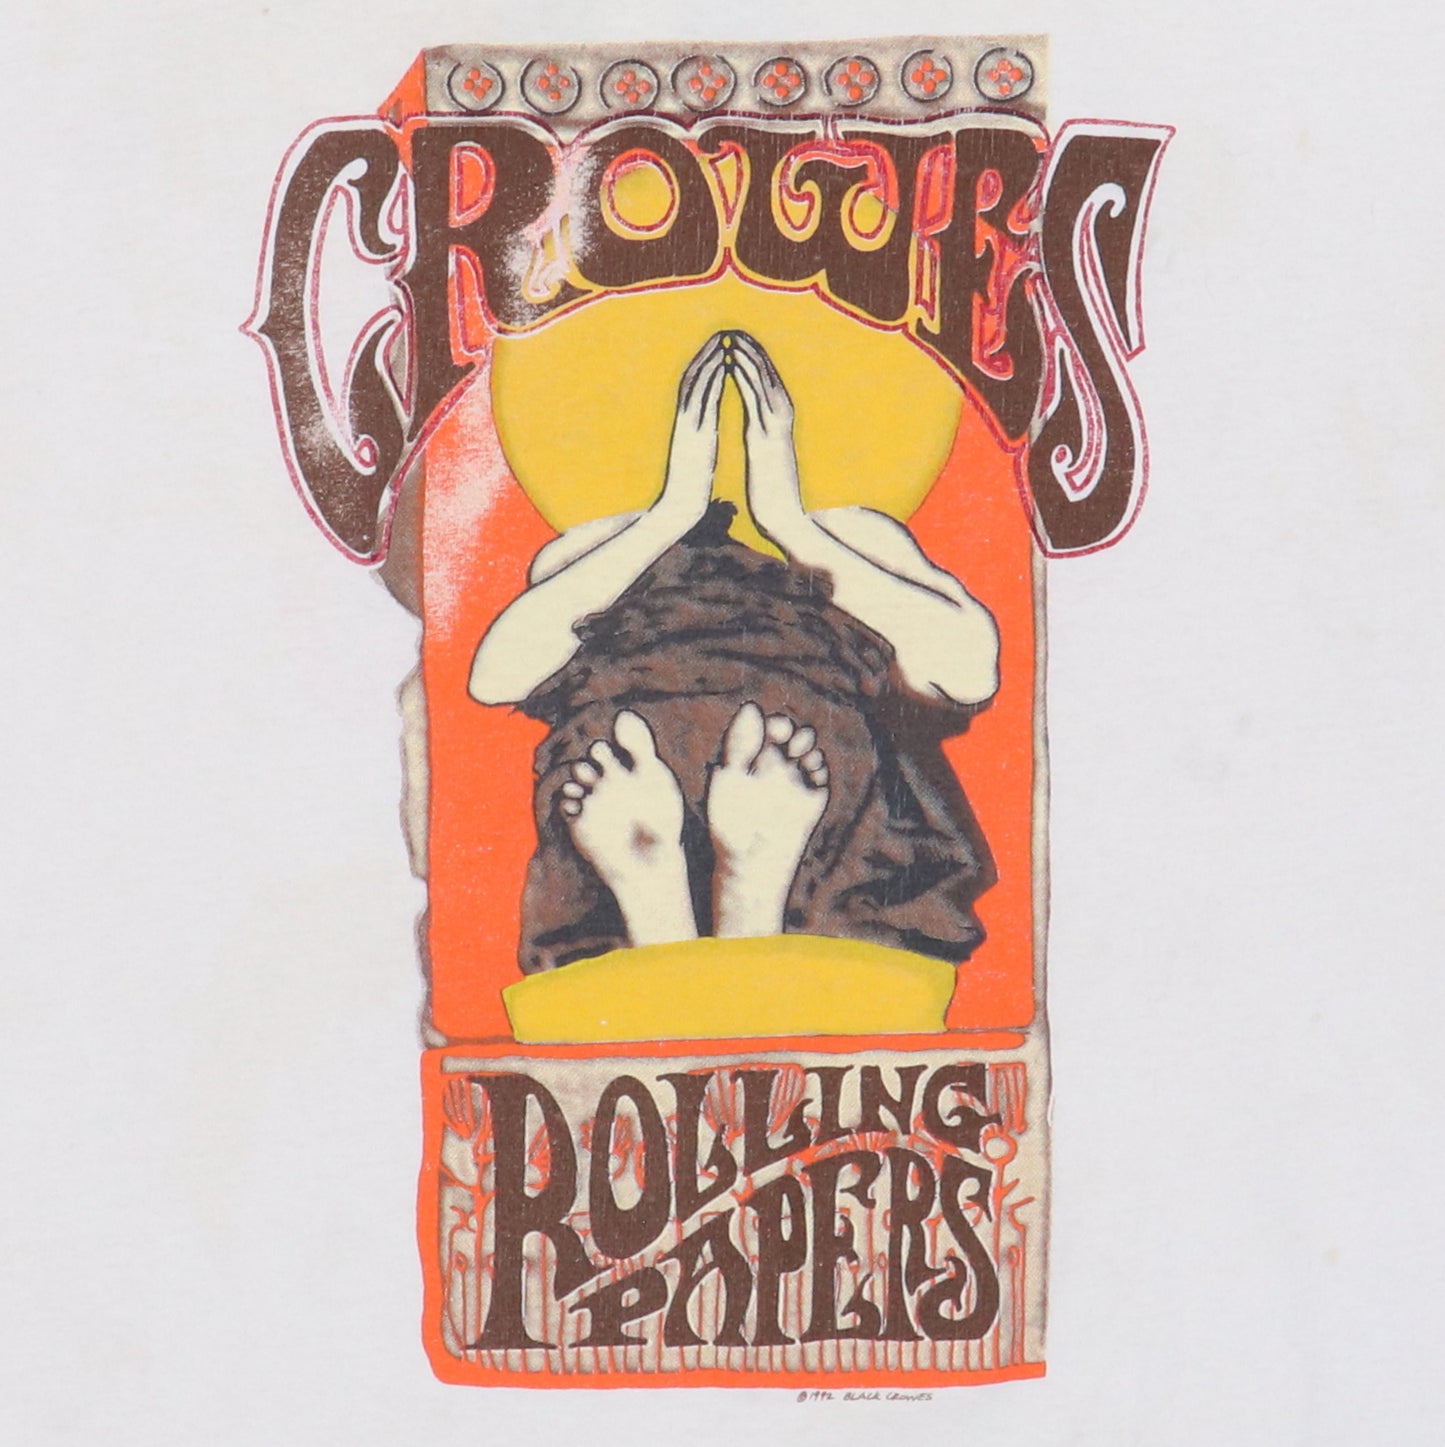 1992 Black Crowes High As The Moon Tour Shirt